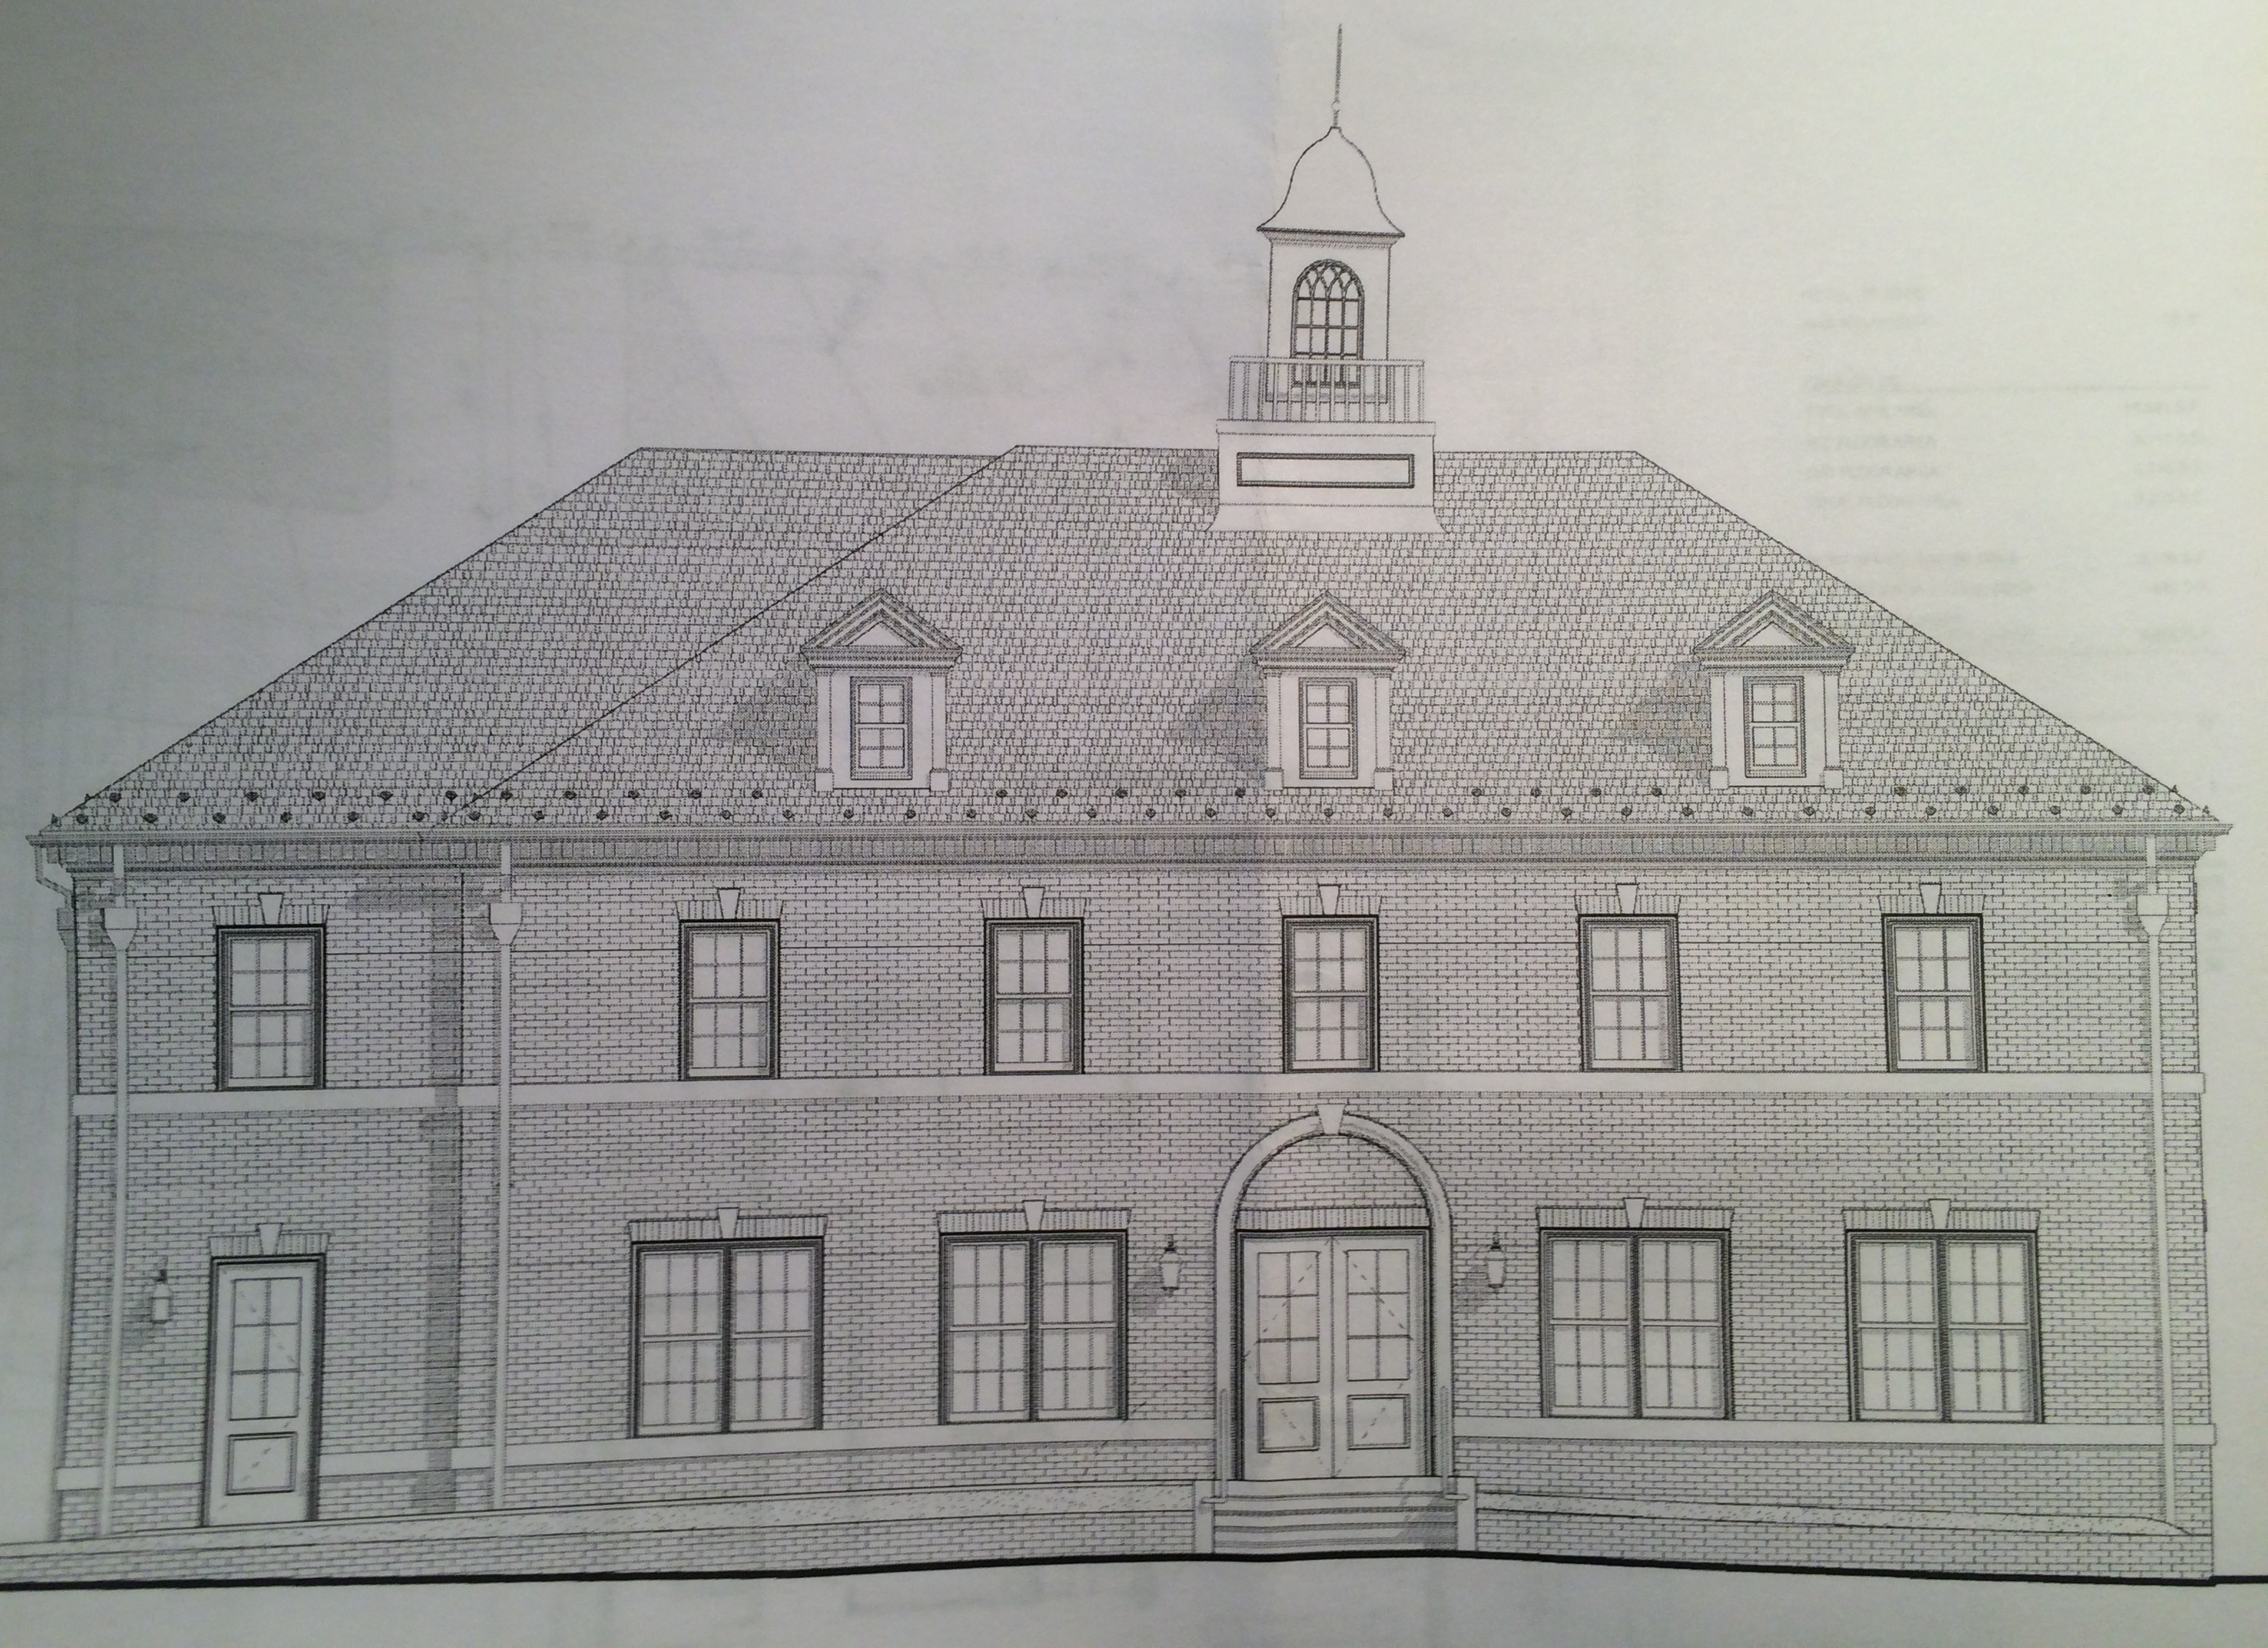 Look Plans For New Post Office On Locust Filed With Town